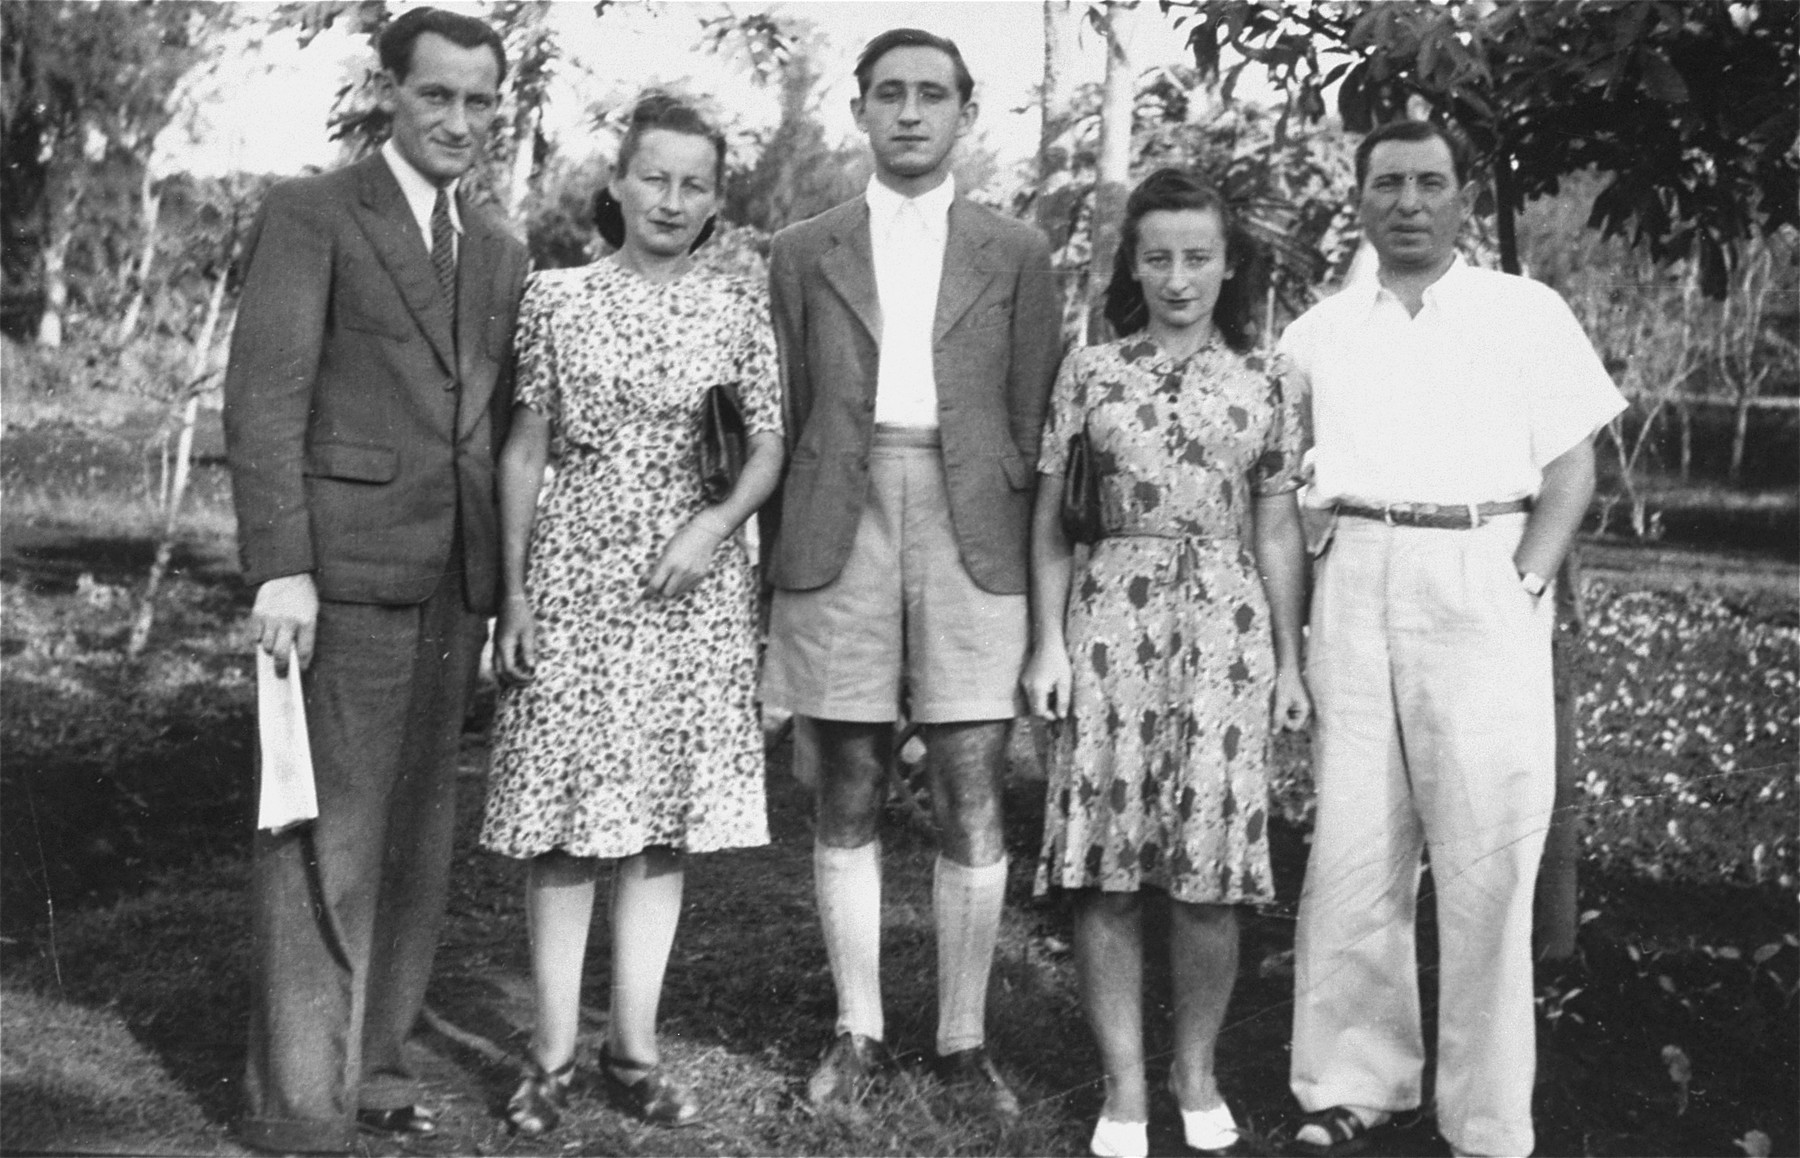 Group portrait of members of the Makowski family from Danzig during their internment on the island of Mauritius.

Pictured from left to right are: Israel Makowski, Fela and Hersh Makowski, Genia (Makowski) Less, and her husband, Beno Less.